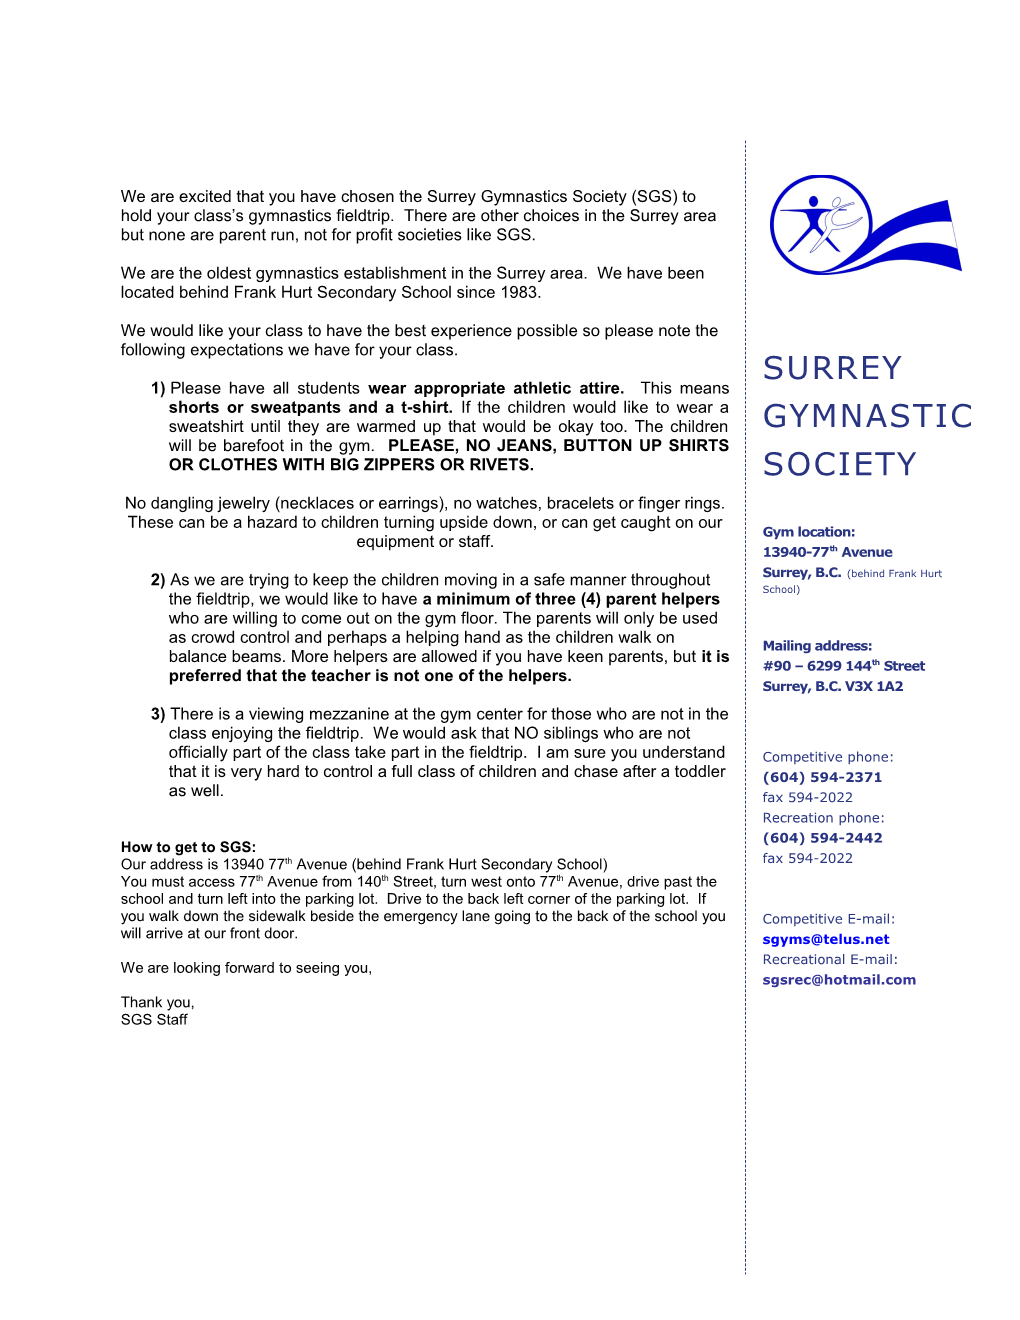 We Are Excited That You Have Chosen the Surrey Gymnastics Society (SGS) to Hold Your Class